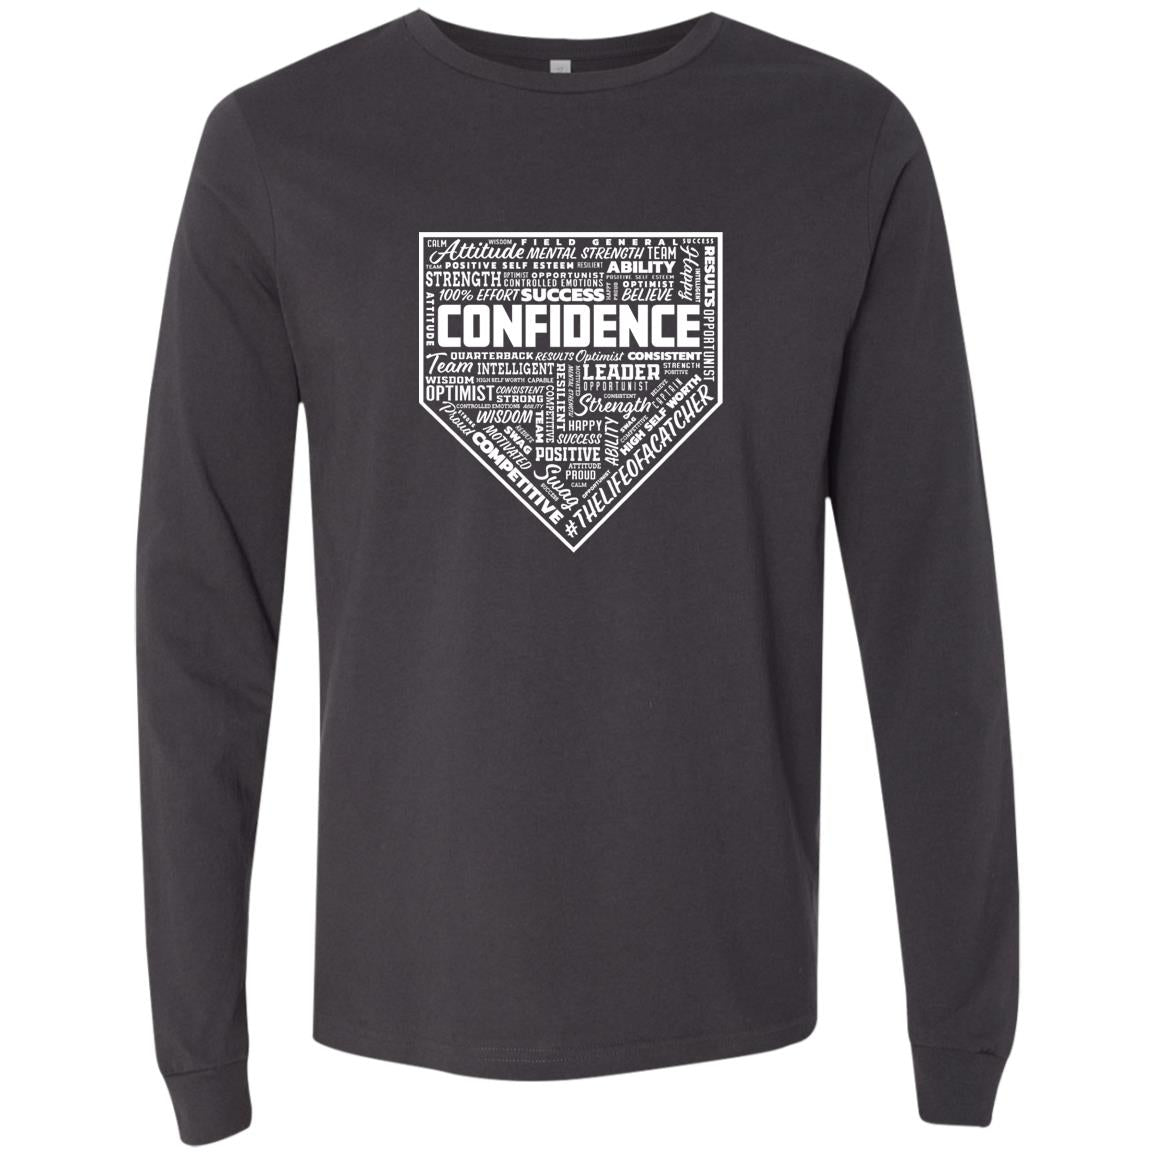 The Catching Guy Catcher Confidence Jersey Tee in grey